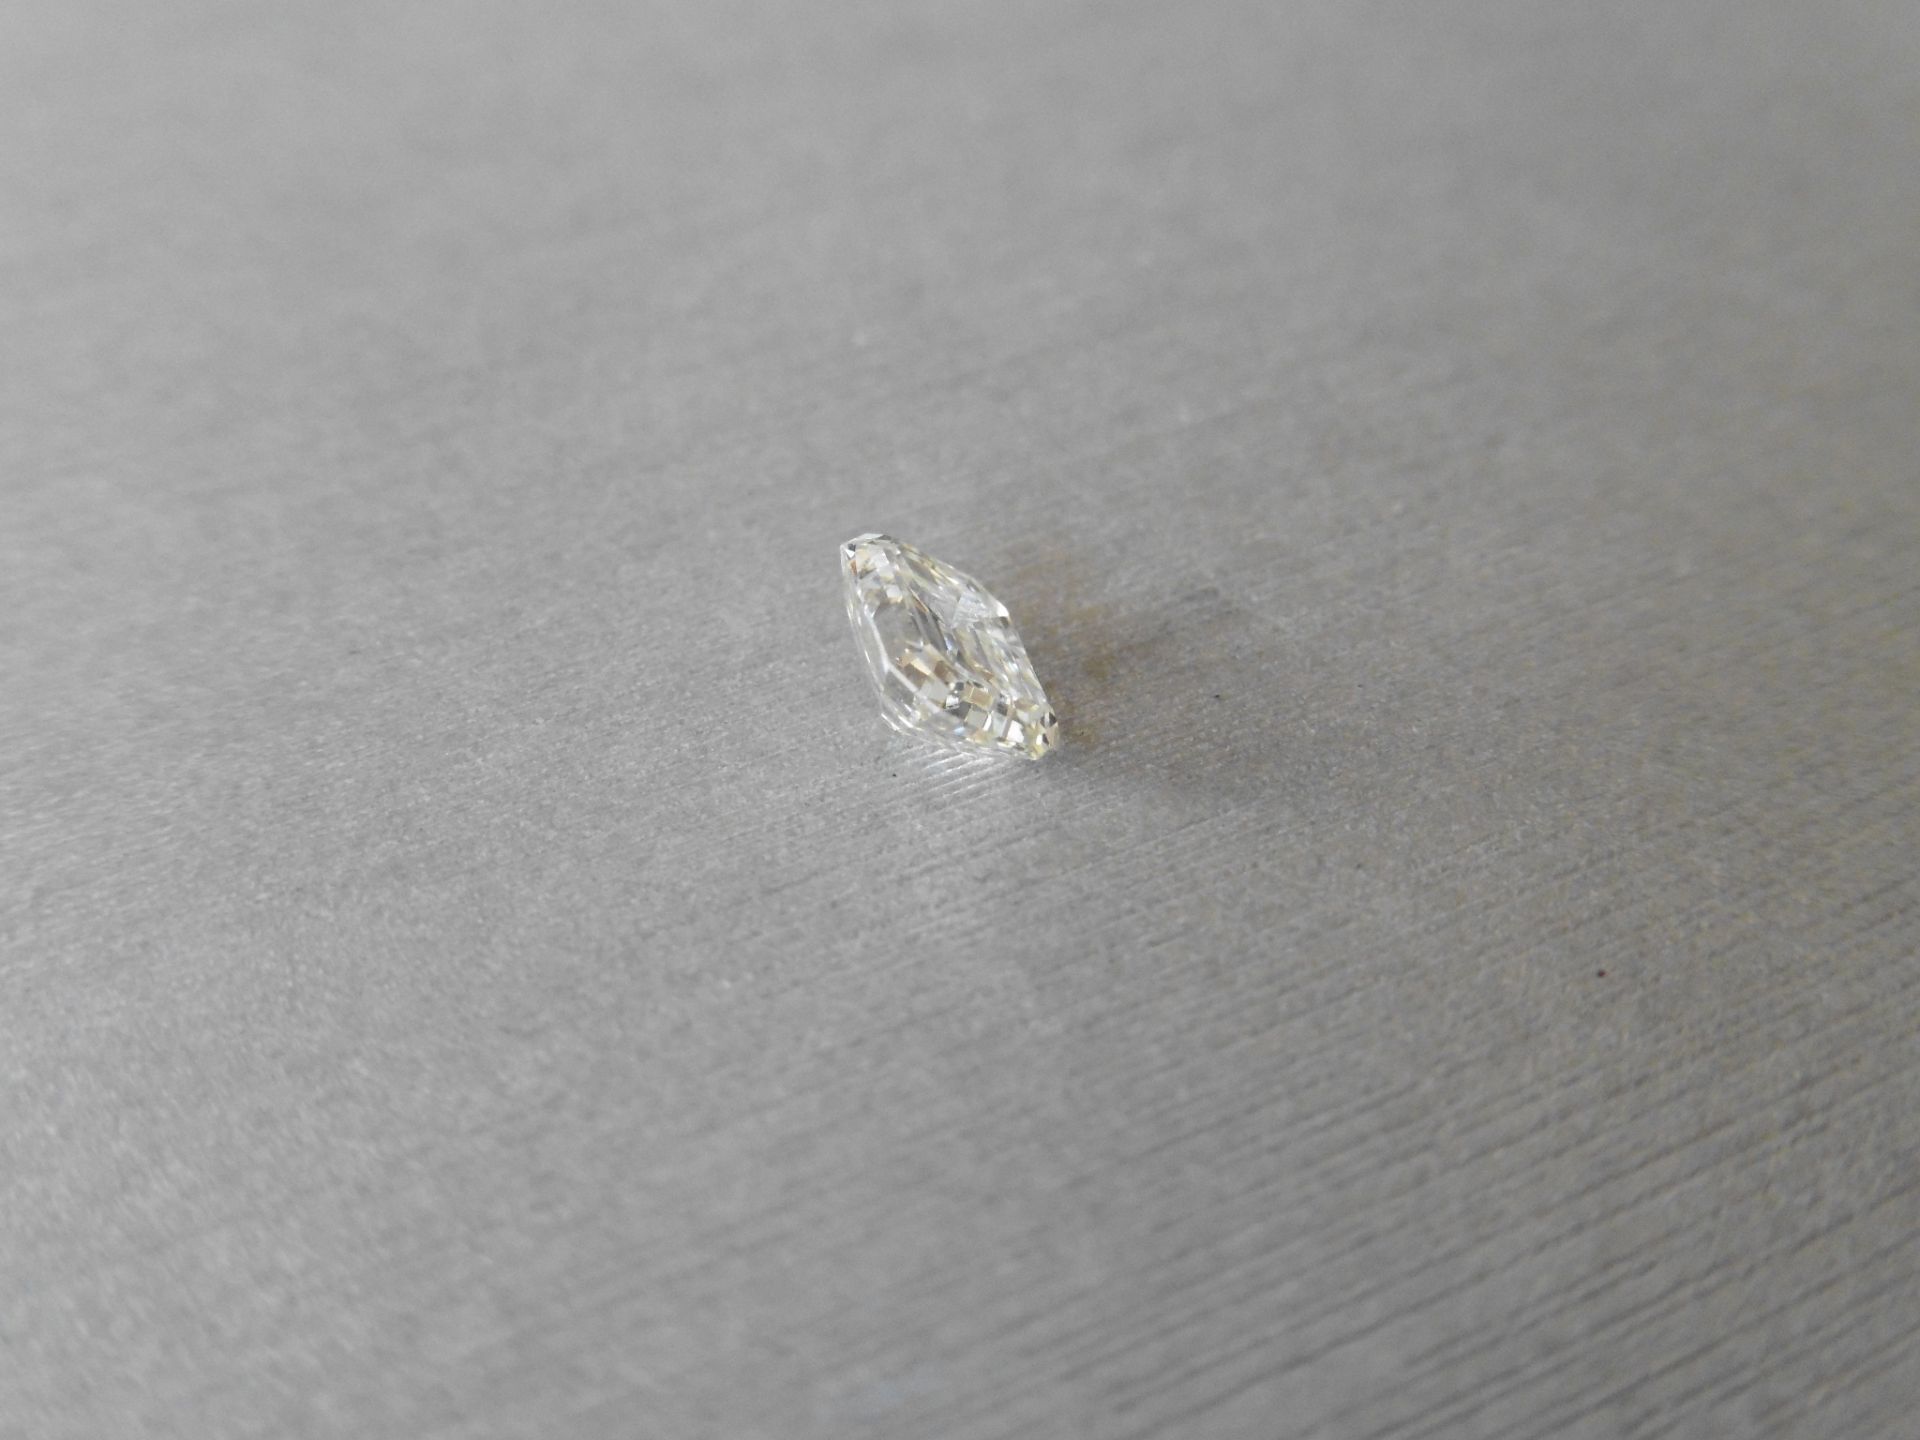 0.92ct single radiant cut diamond. Measures 6.00 x 5.3mm. J colour and VVS clarity. Valued at £6950. - Image 2 of 5